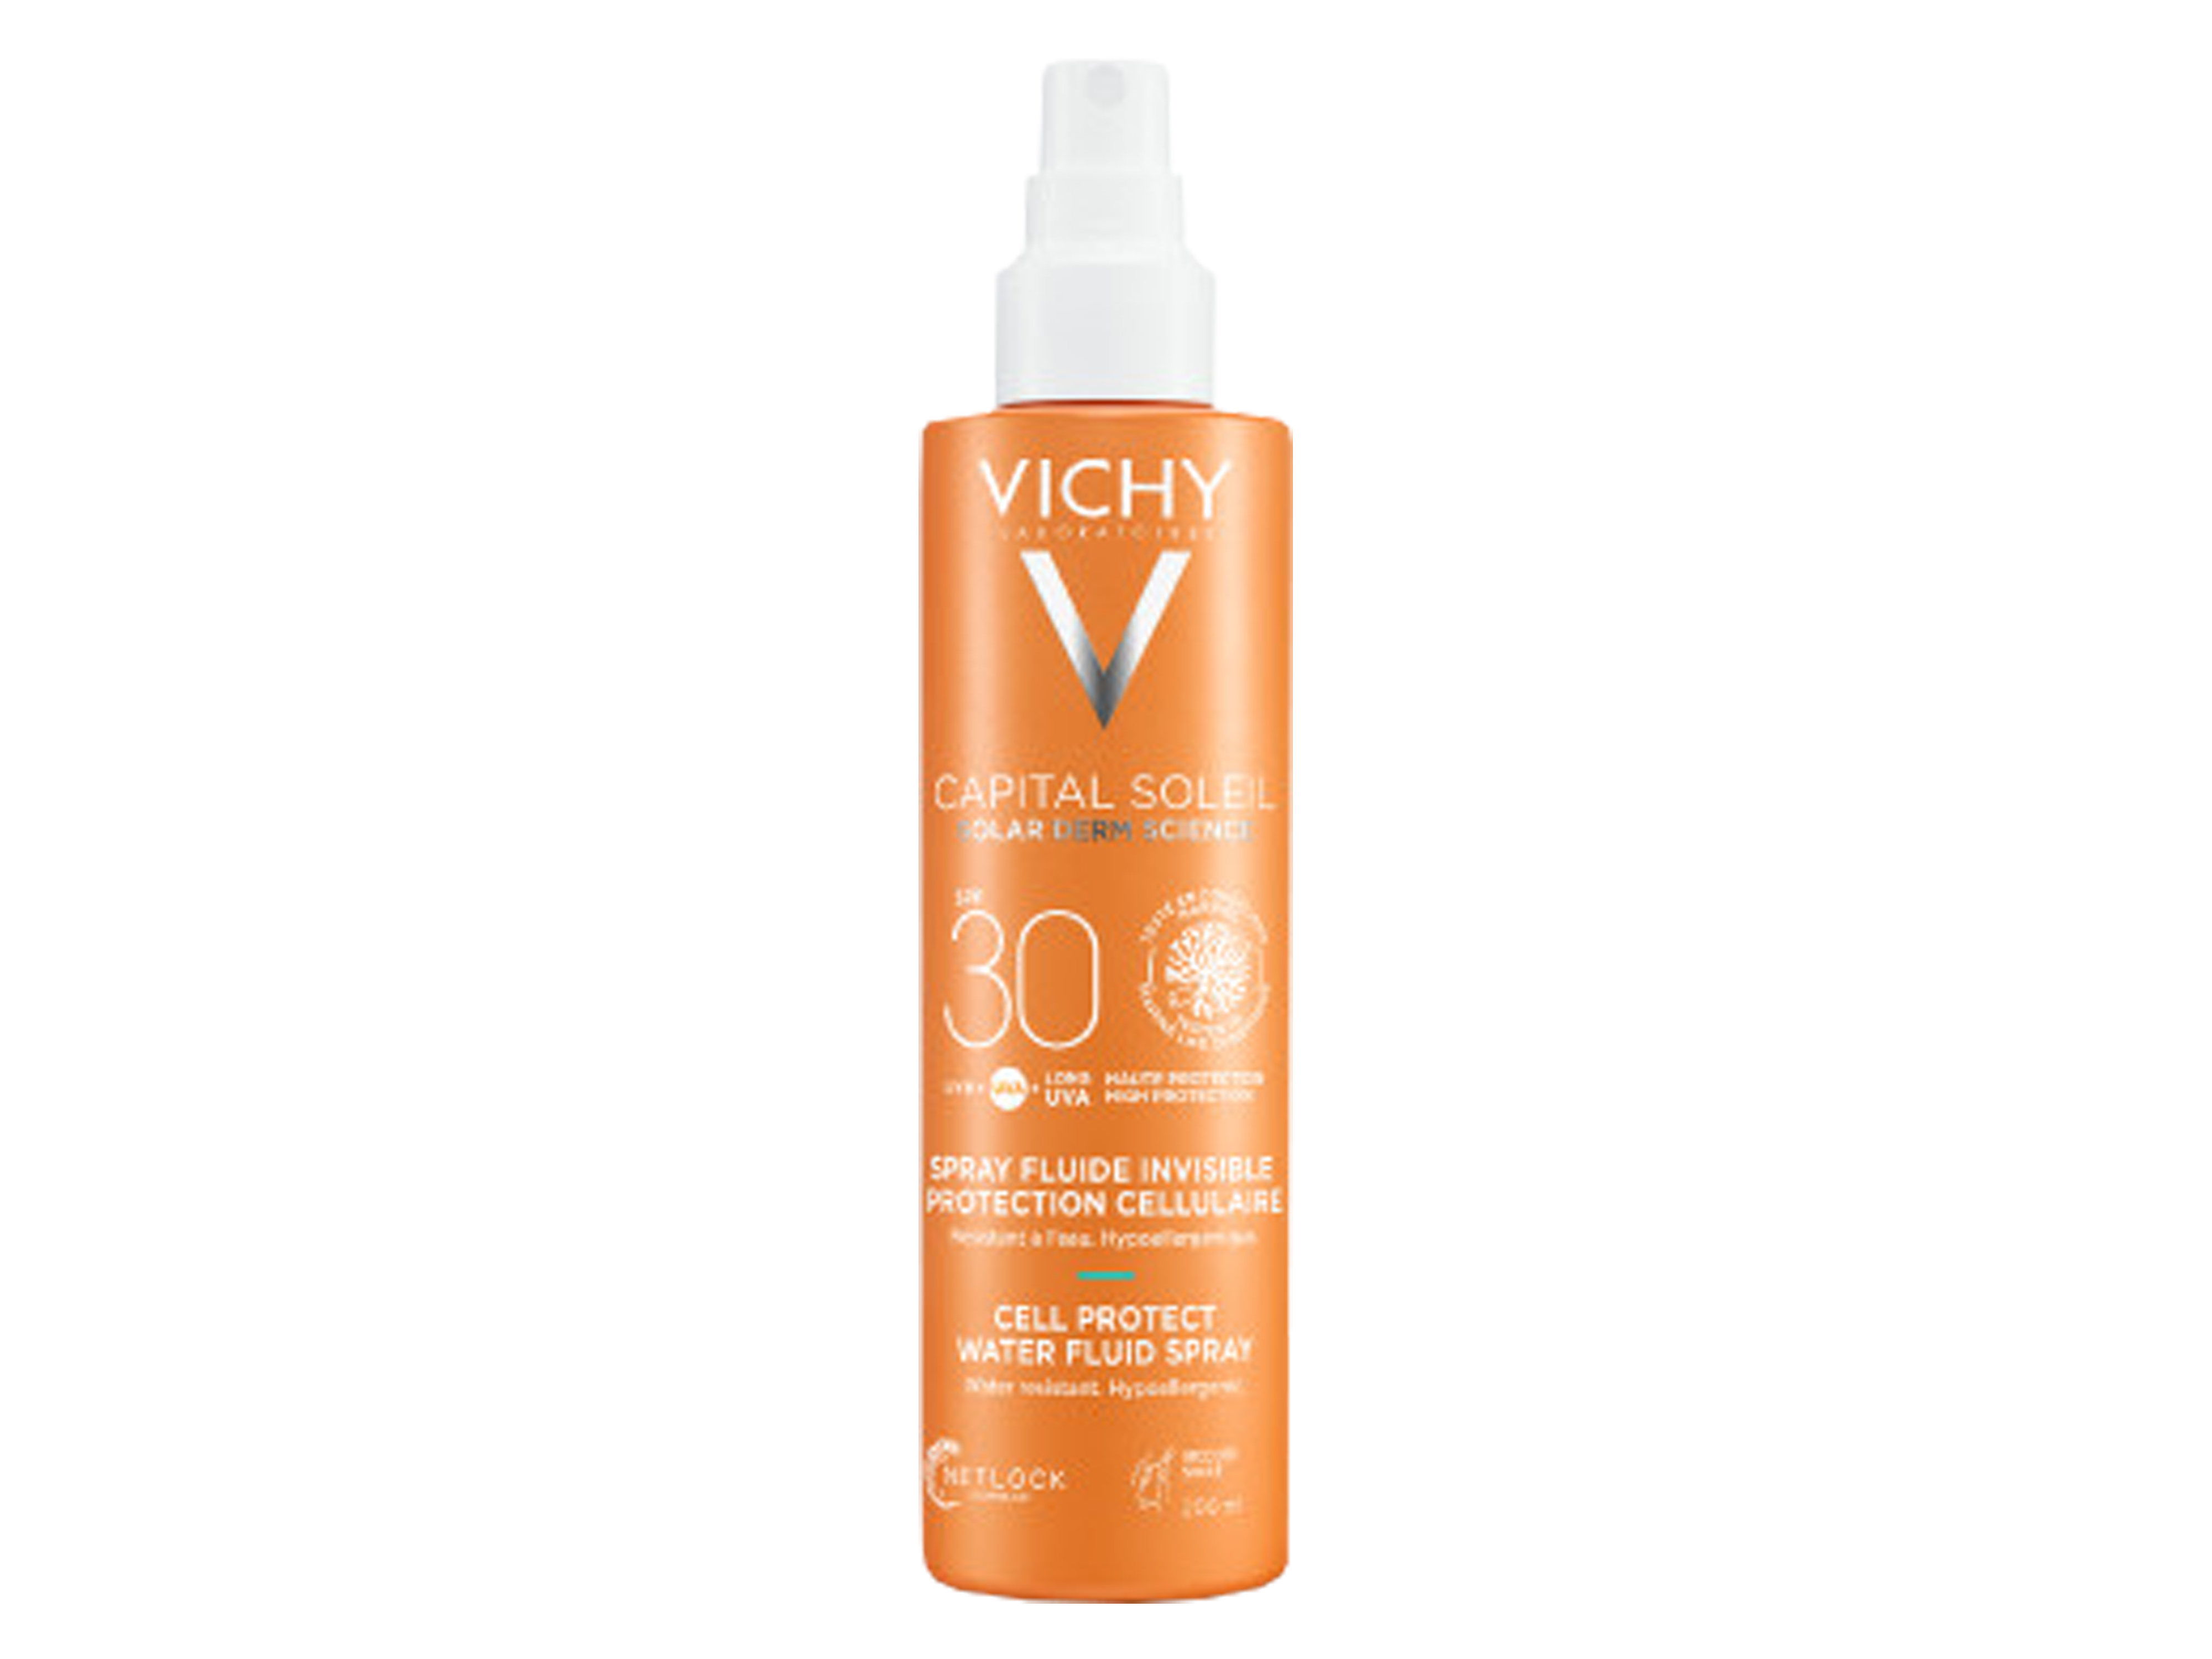 Vichy Capital Soleil Cell Protect Water Fluid Spray SPF30, 200 ml